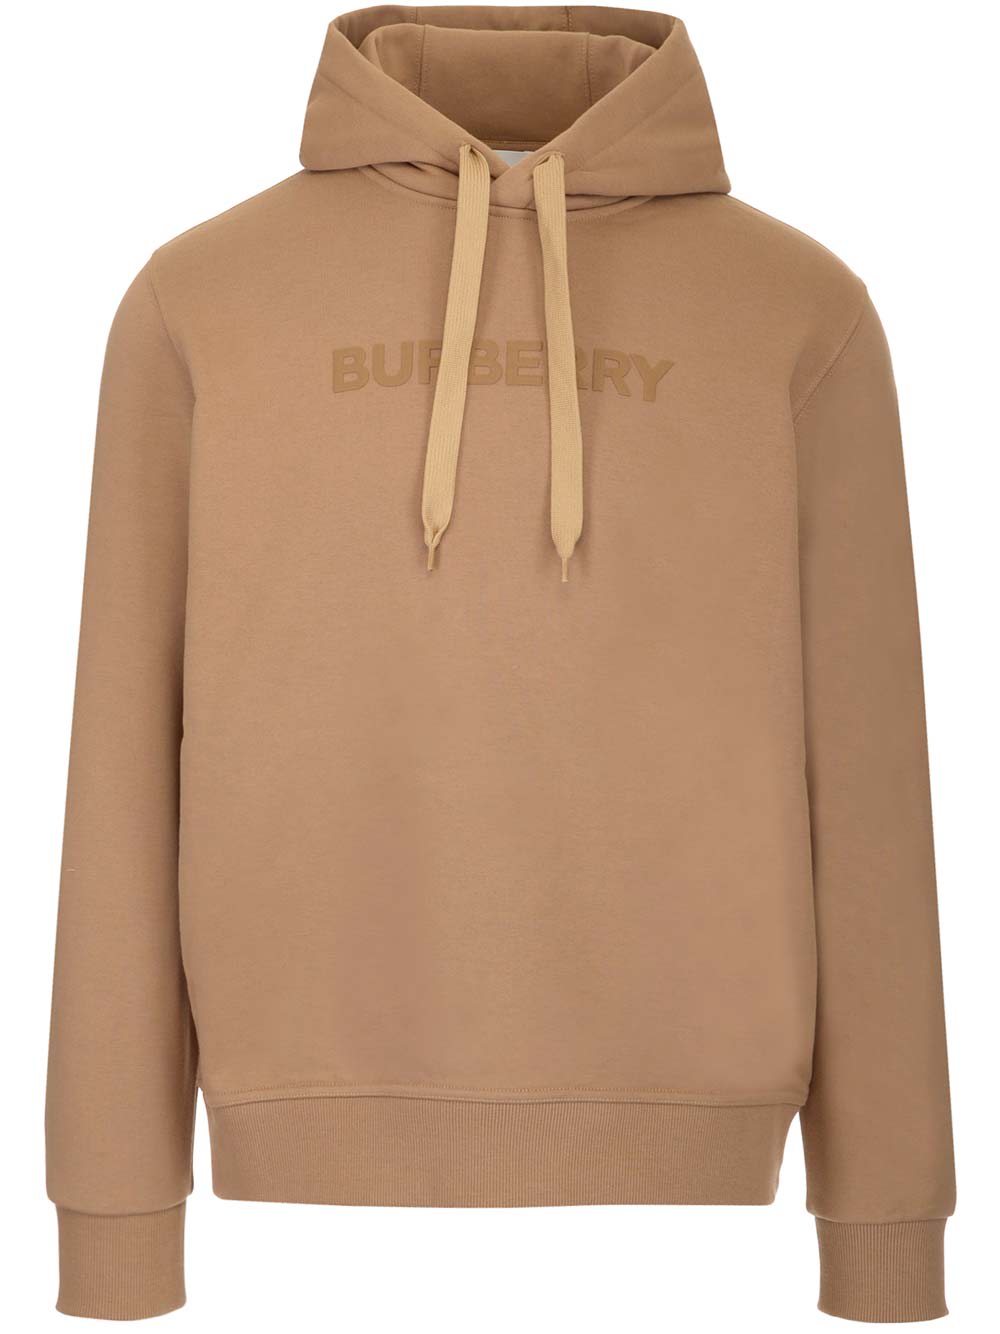 Camel Colored Cotton Hoodie